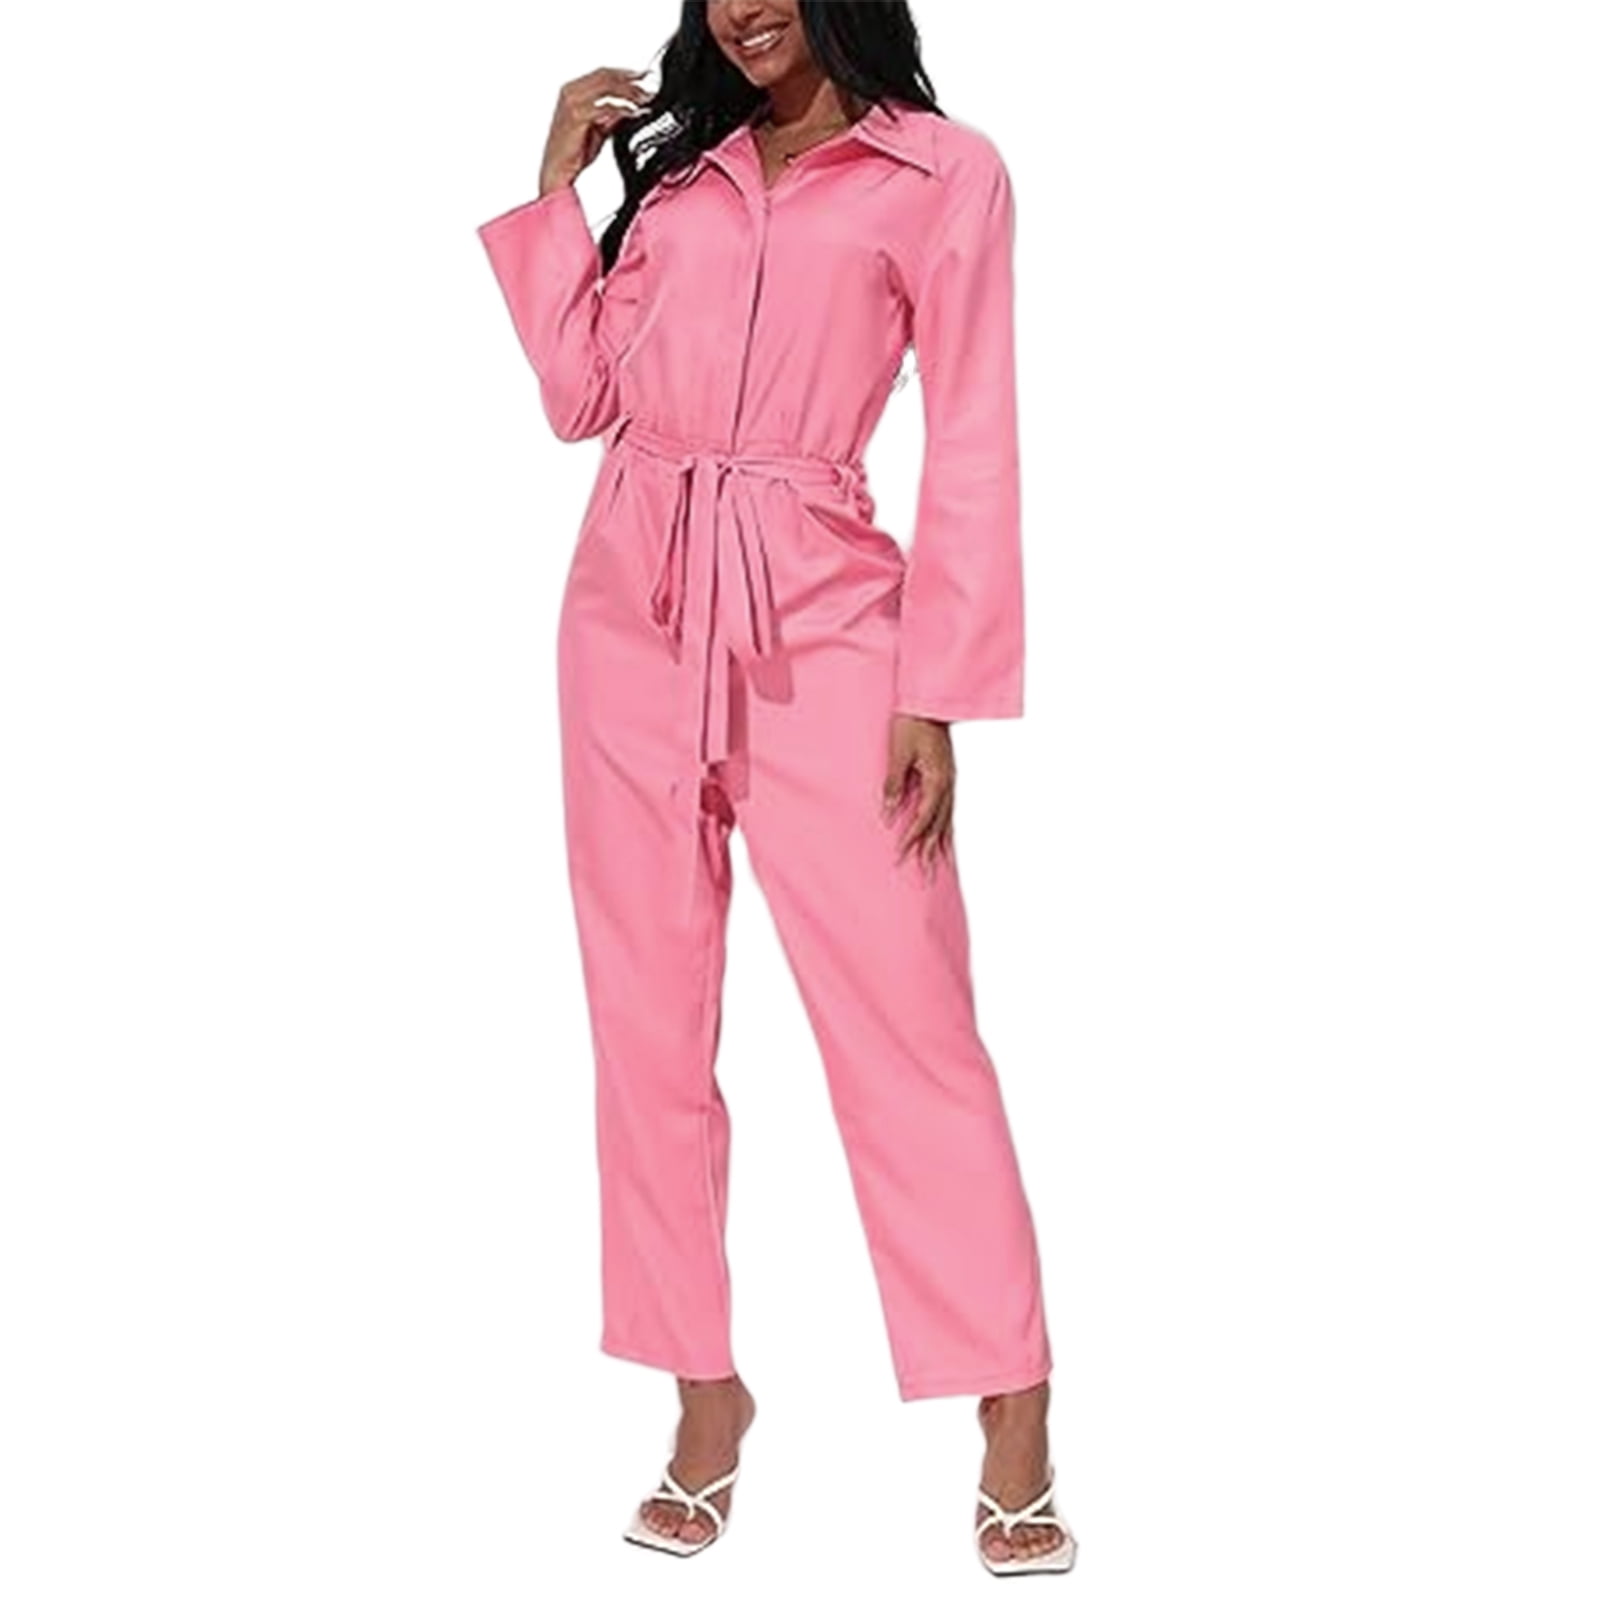 Buy Newborn Baby Girls Fold Ruffle Jumpsuit Solid Romper Long Sleeve One- Piece Coming Home Outfits+Headband (Hot Pink, 1-3 Months) at Amazon.in